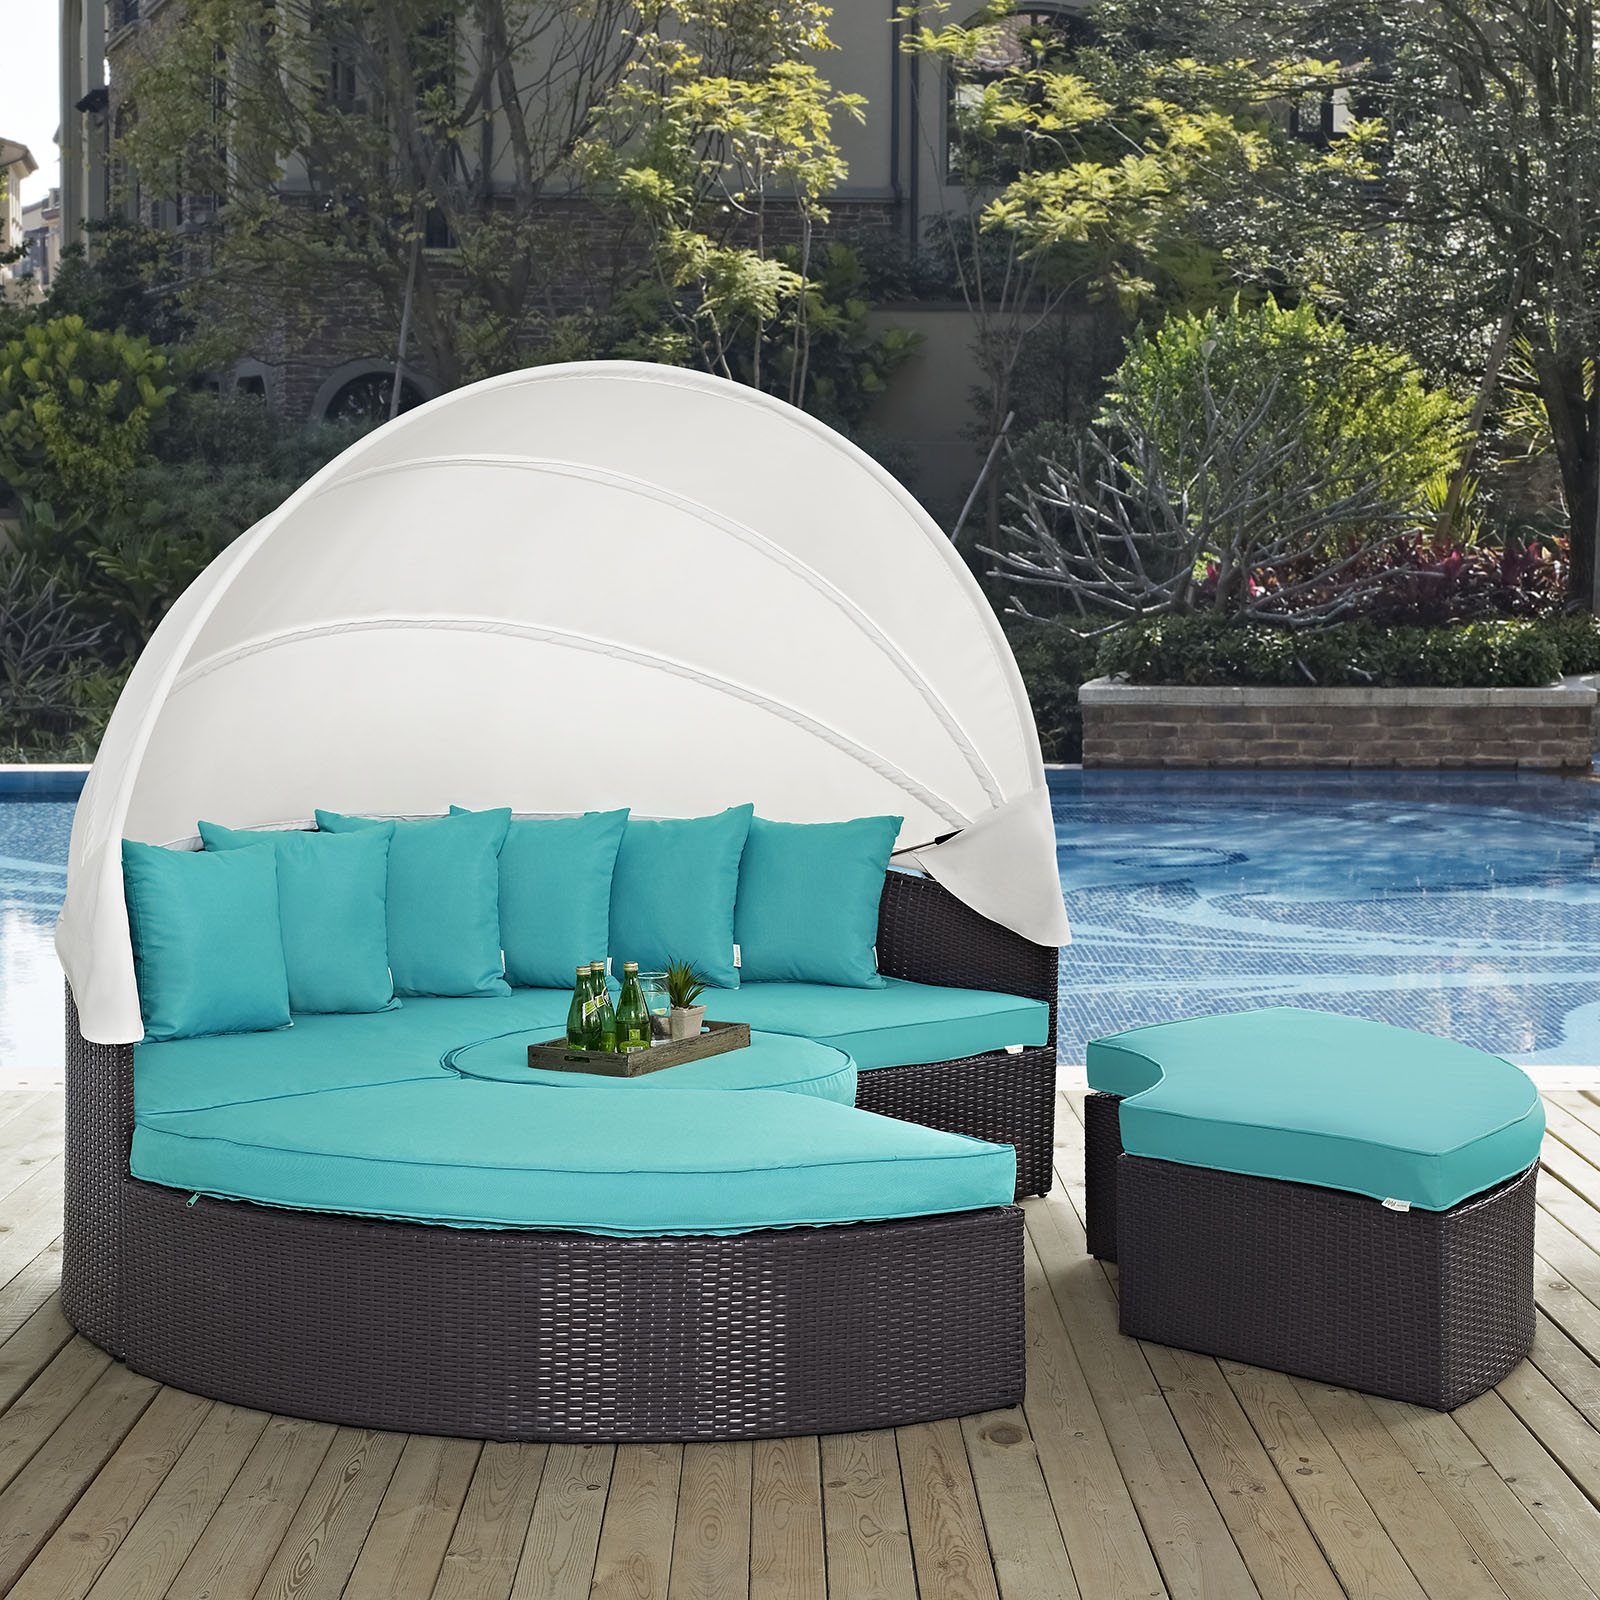 Modway Convene Canopy Outdoor Patio Daybed in Espresso Turquoise - image 1 of 6